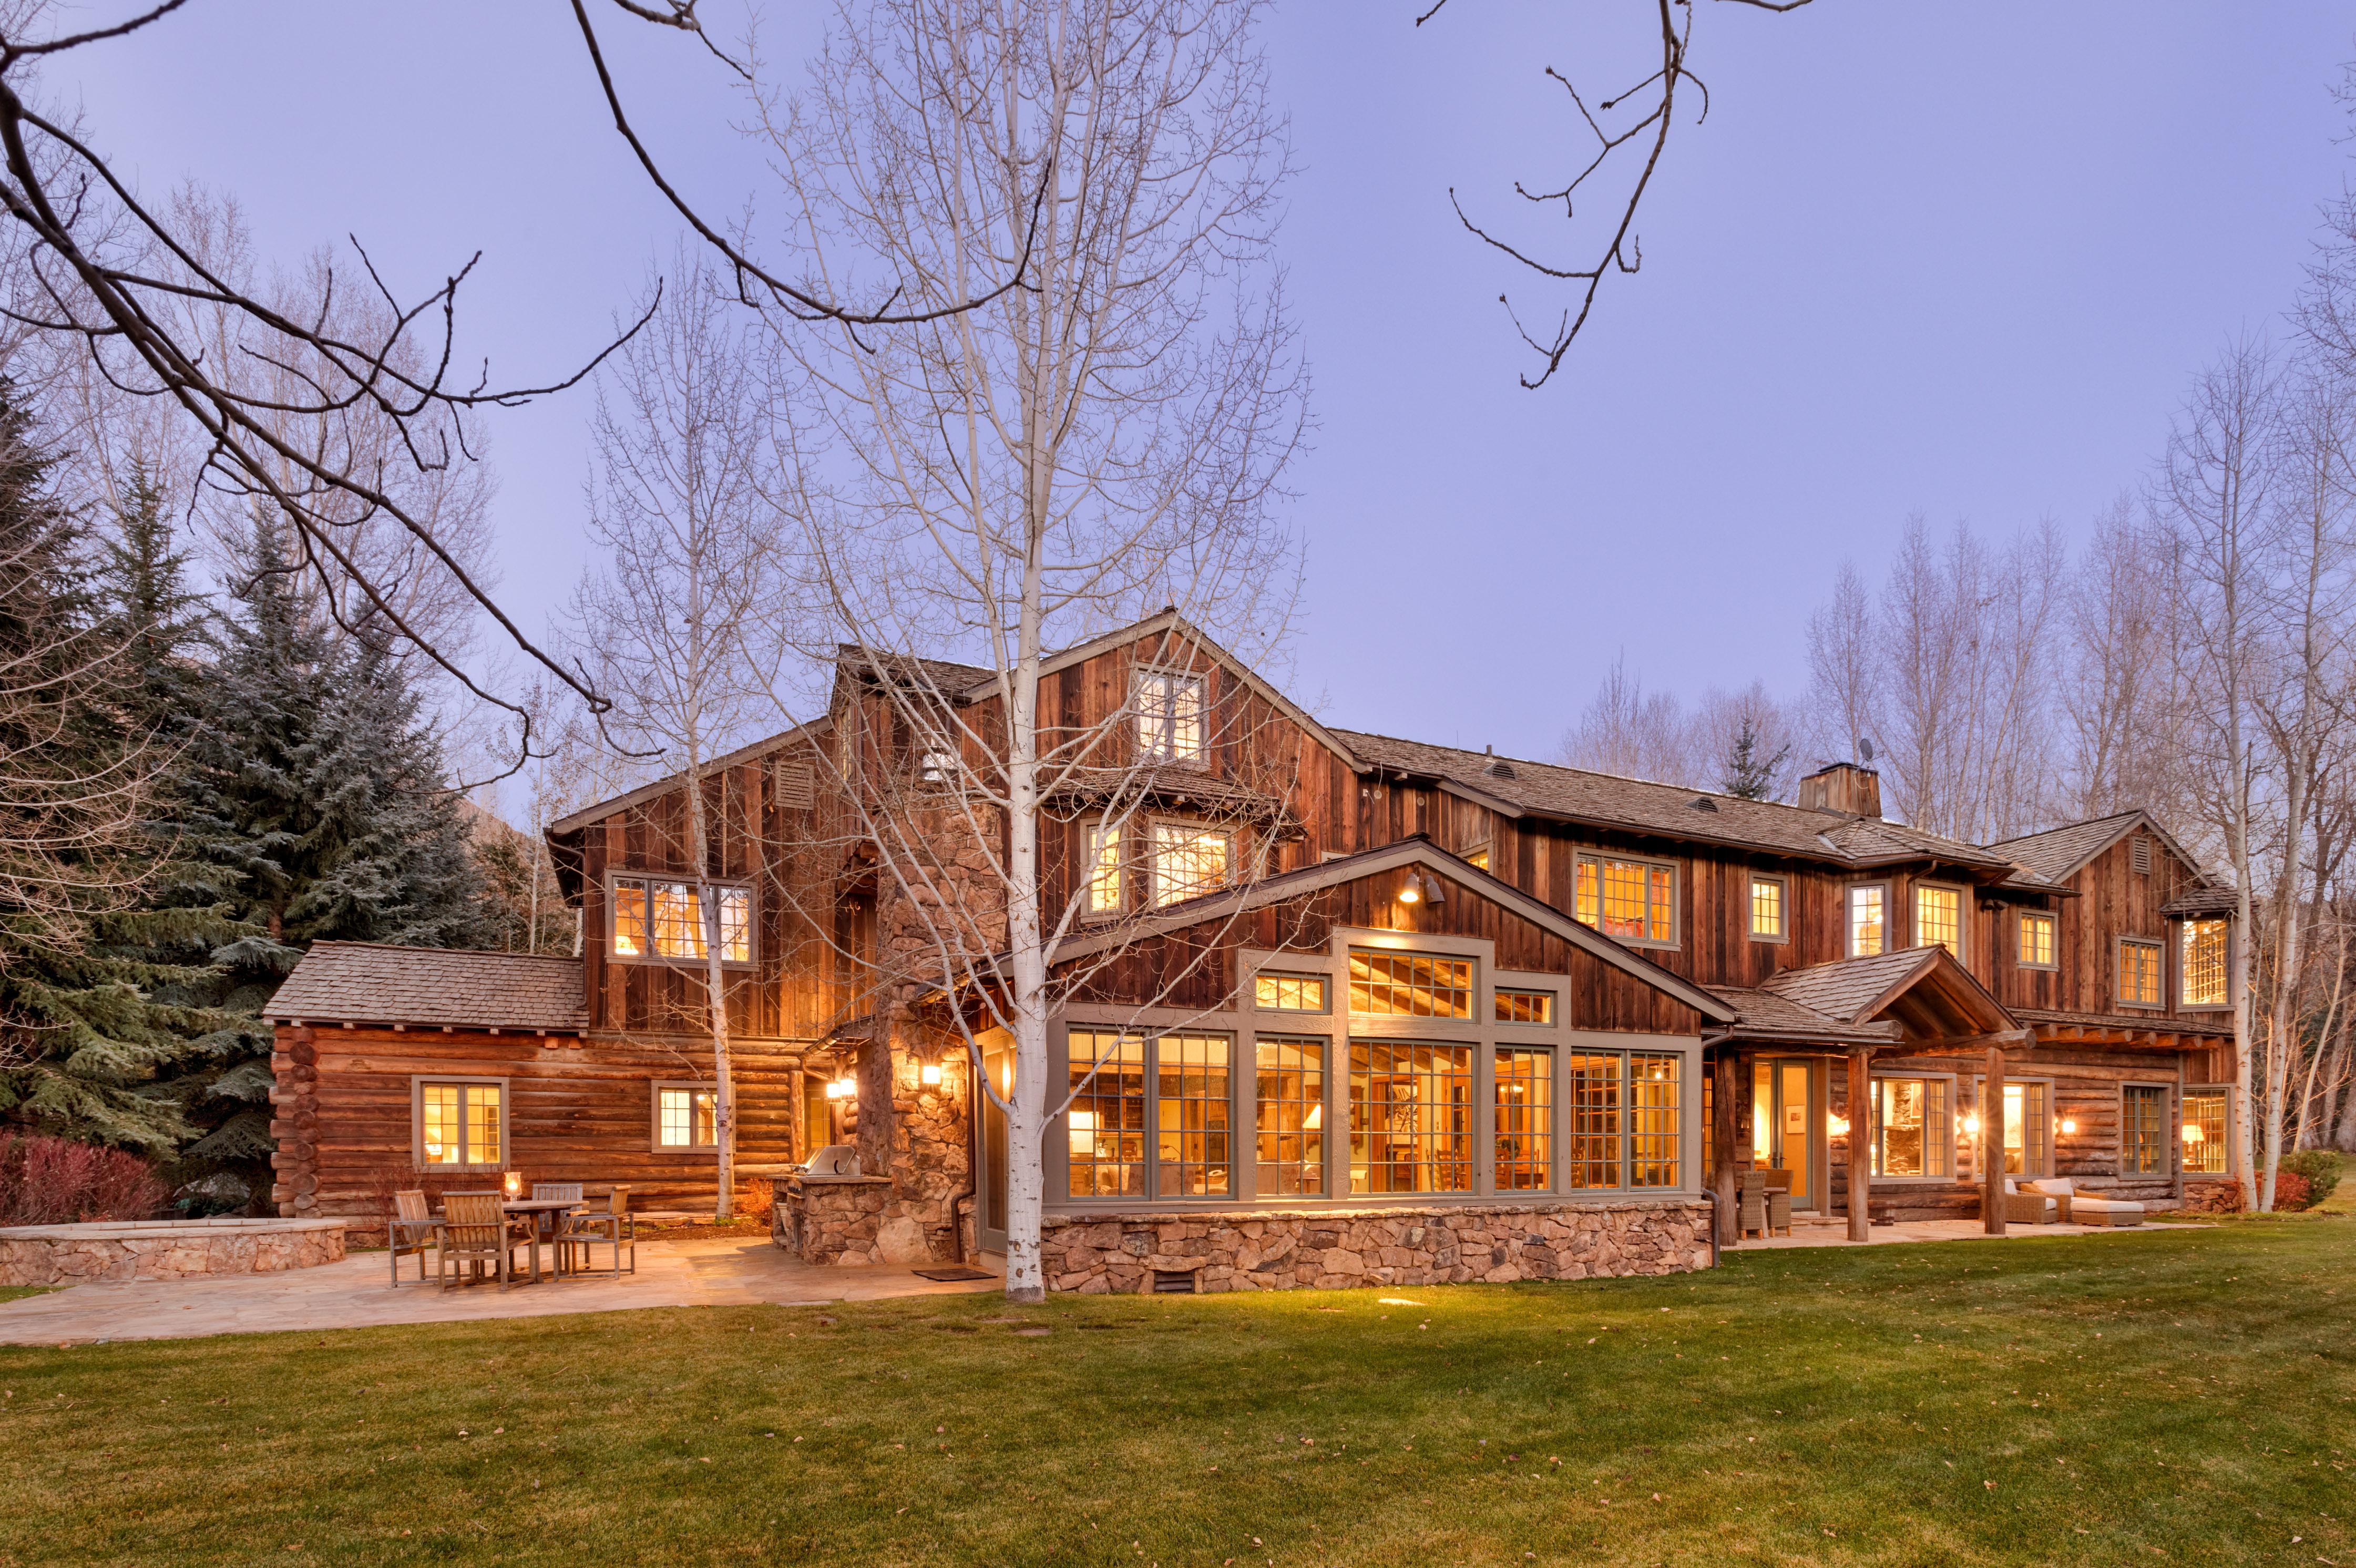 Exclusive and Private Estate, 6 + bedroom home on the Roaring Fork River